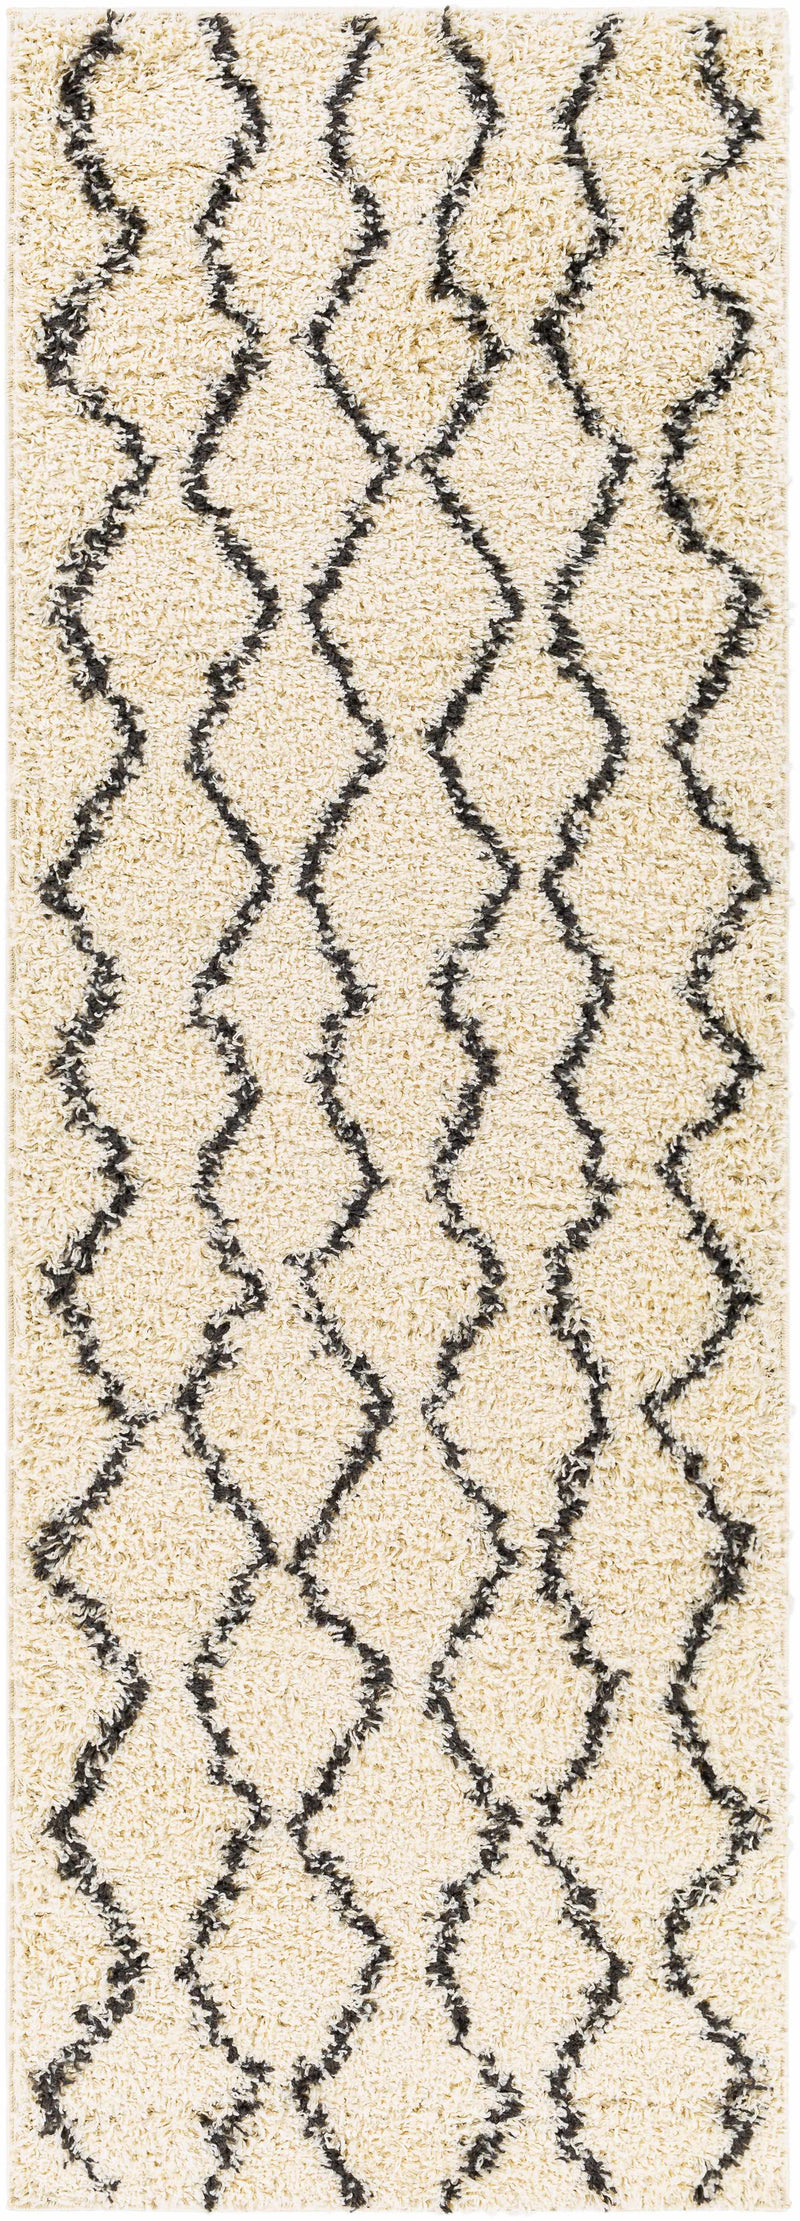 Boutique Rugs - Assiniboia Moroccan Shag Rug Rugs Boutique Rugs 2'7" x 7'3" Runner 